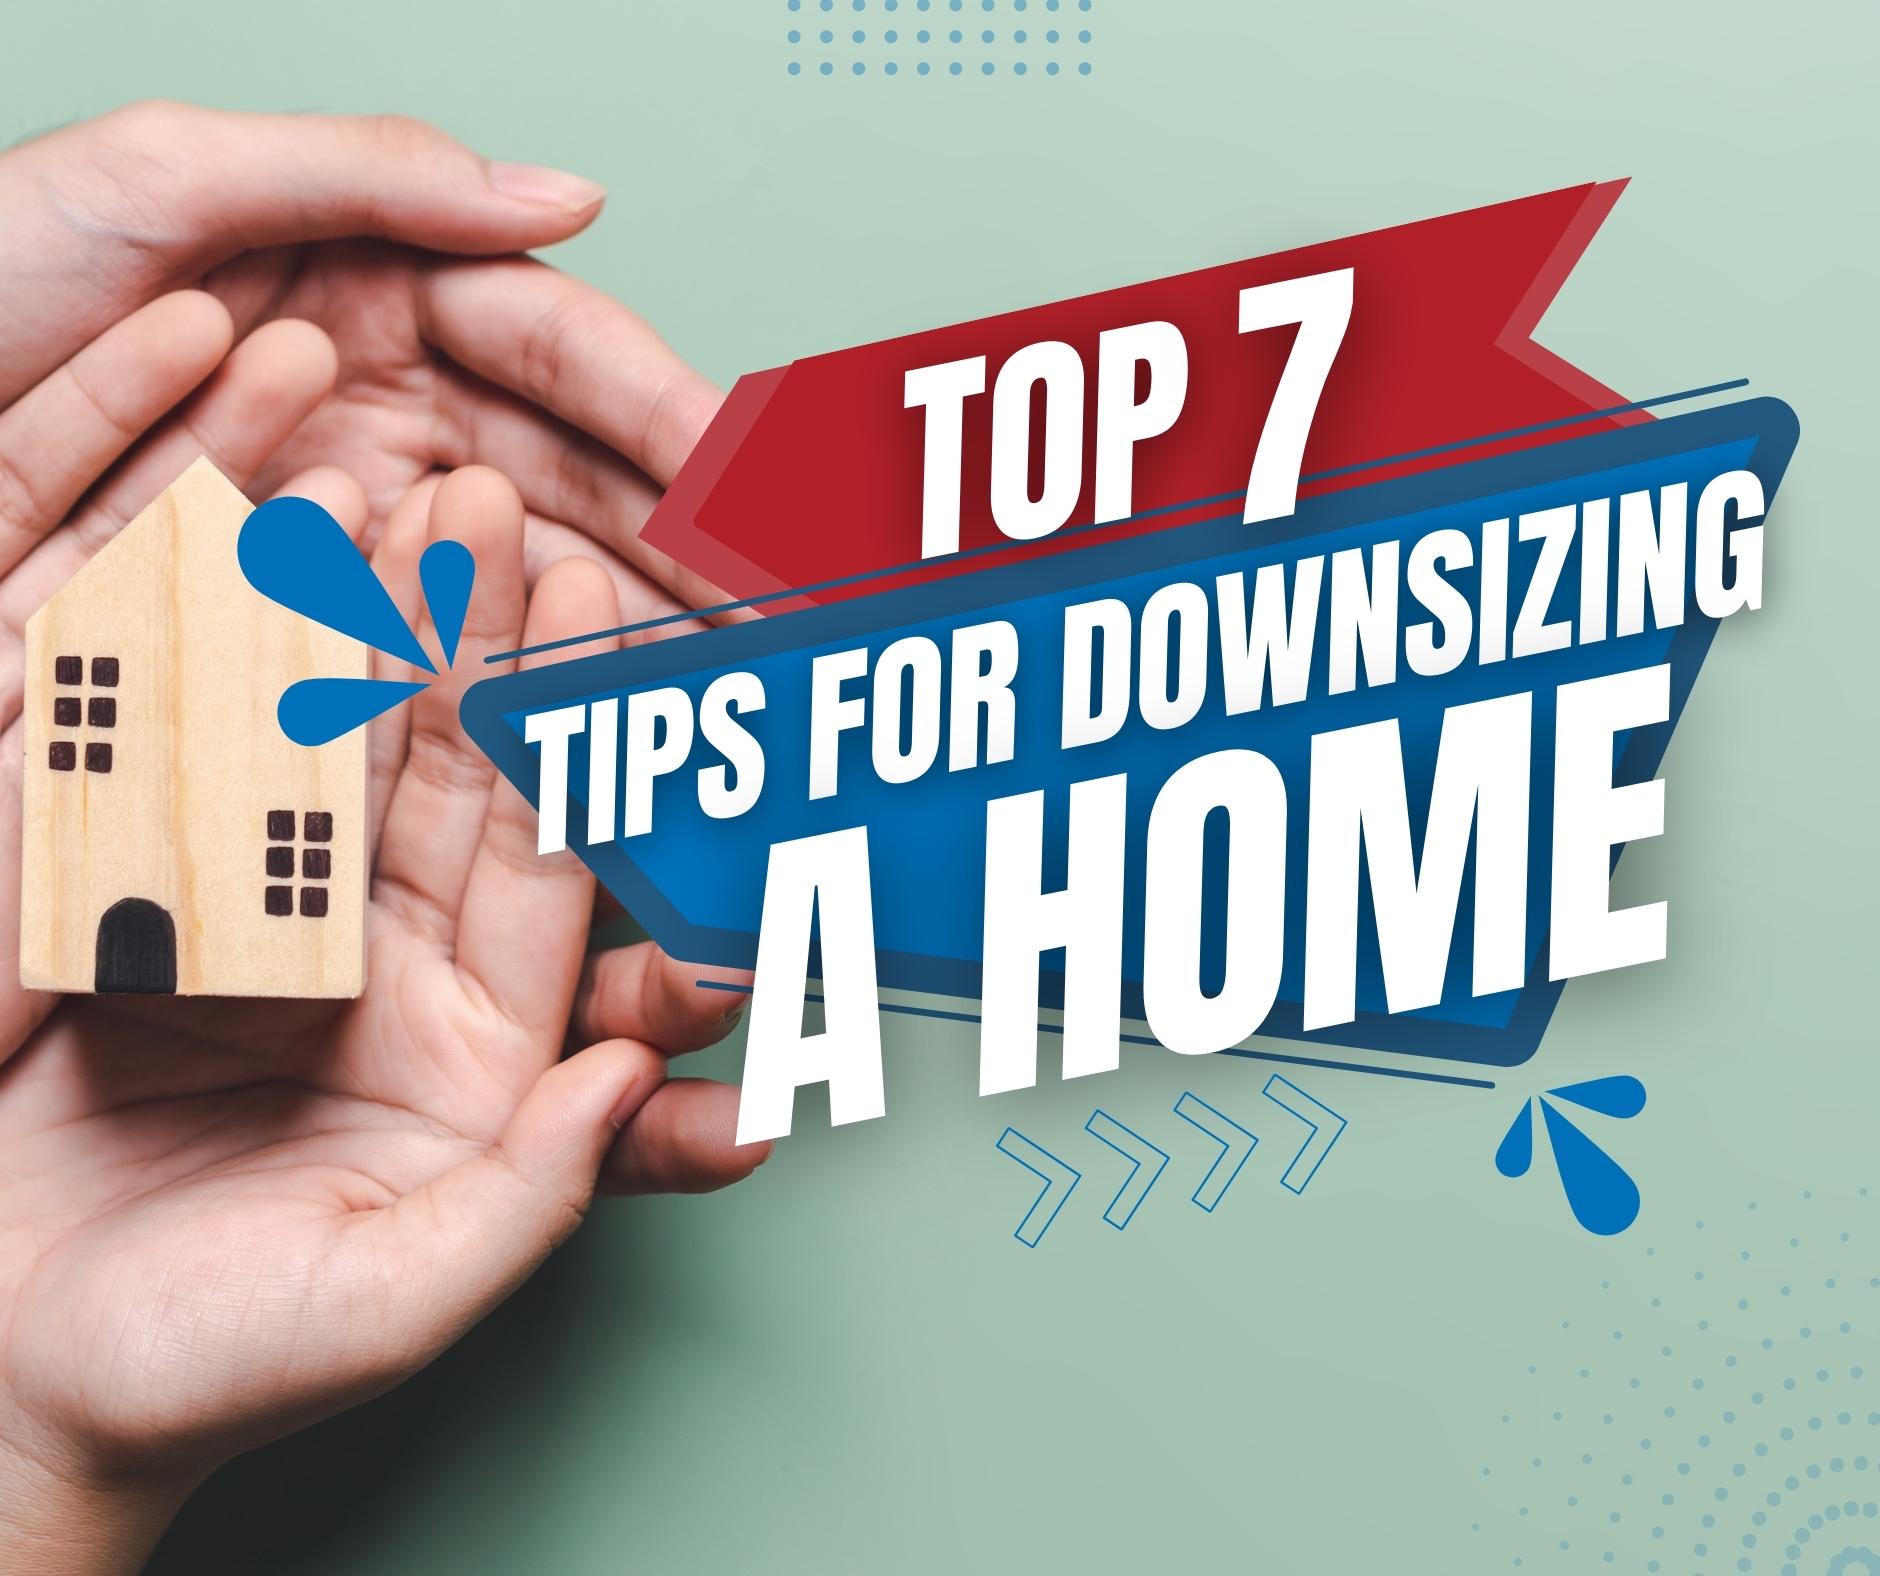 Top 7 Tips For Downsizing A Home